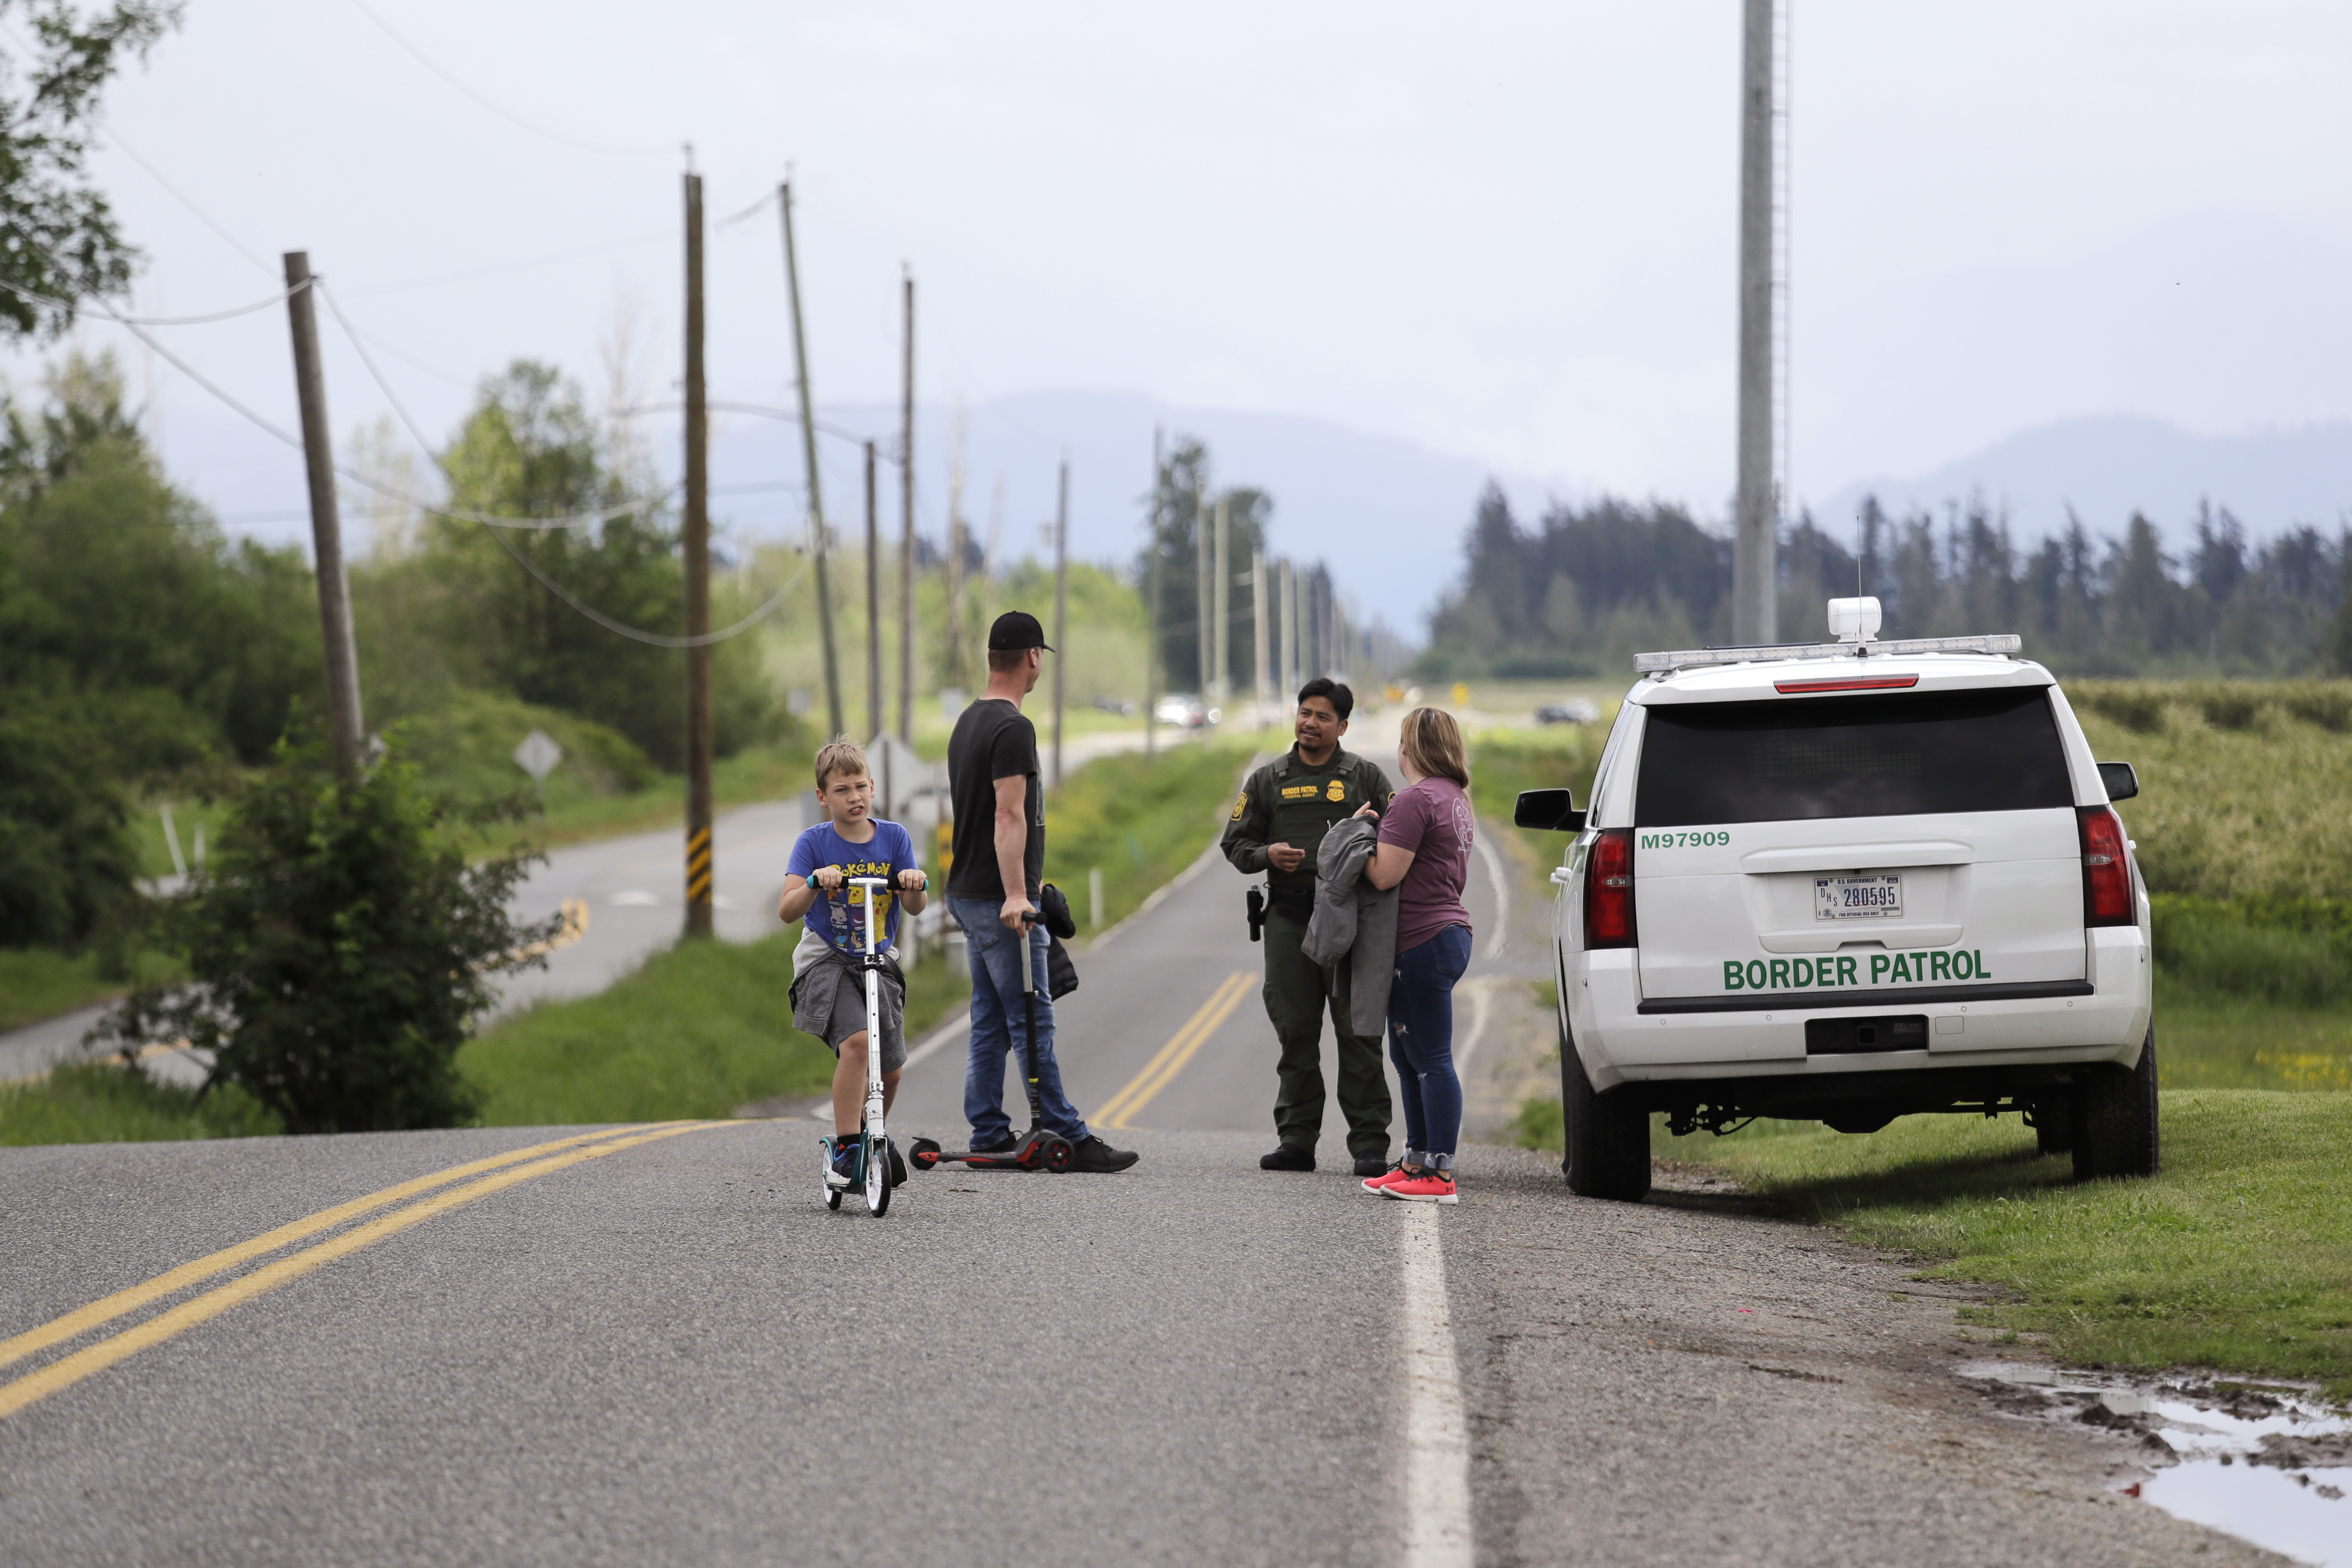 A Border Patrol officer in the U.S. talks with nearby residents on E. Boundary Rd., paralleling 0 Ave. behind them in Canada, near Lynden, Washington.